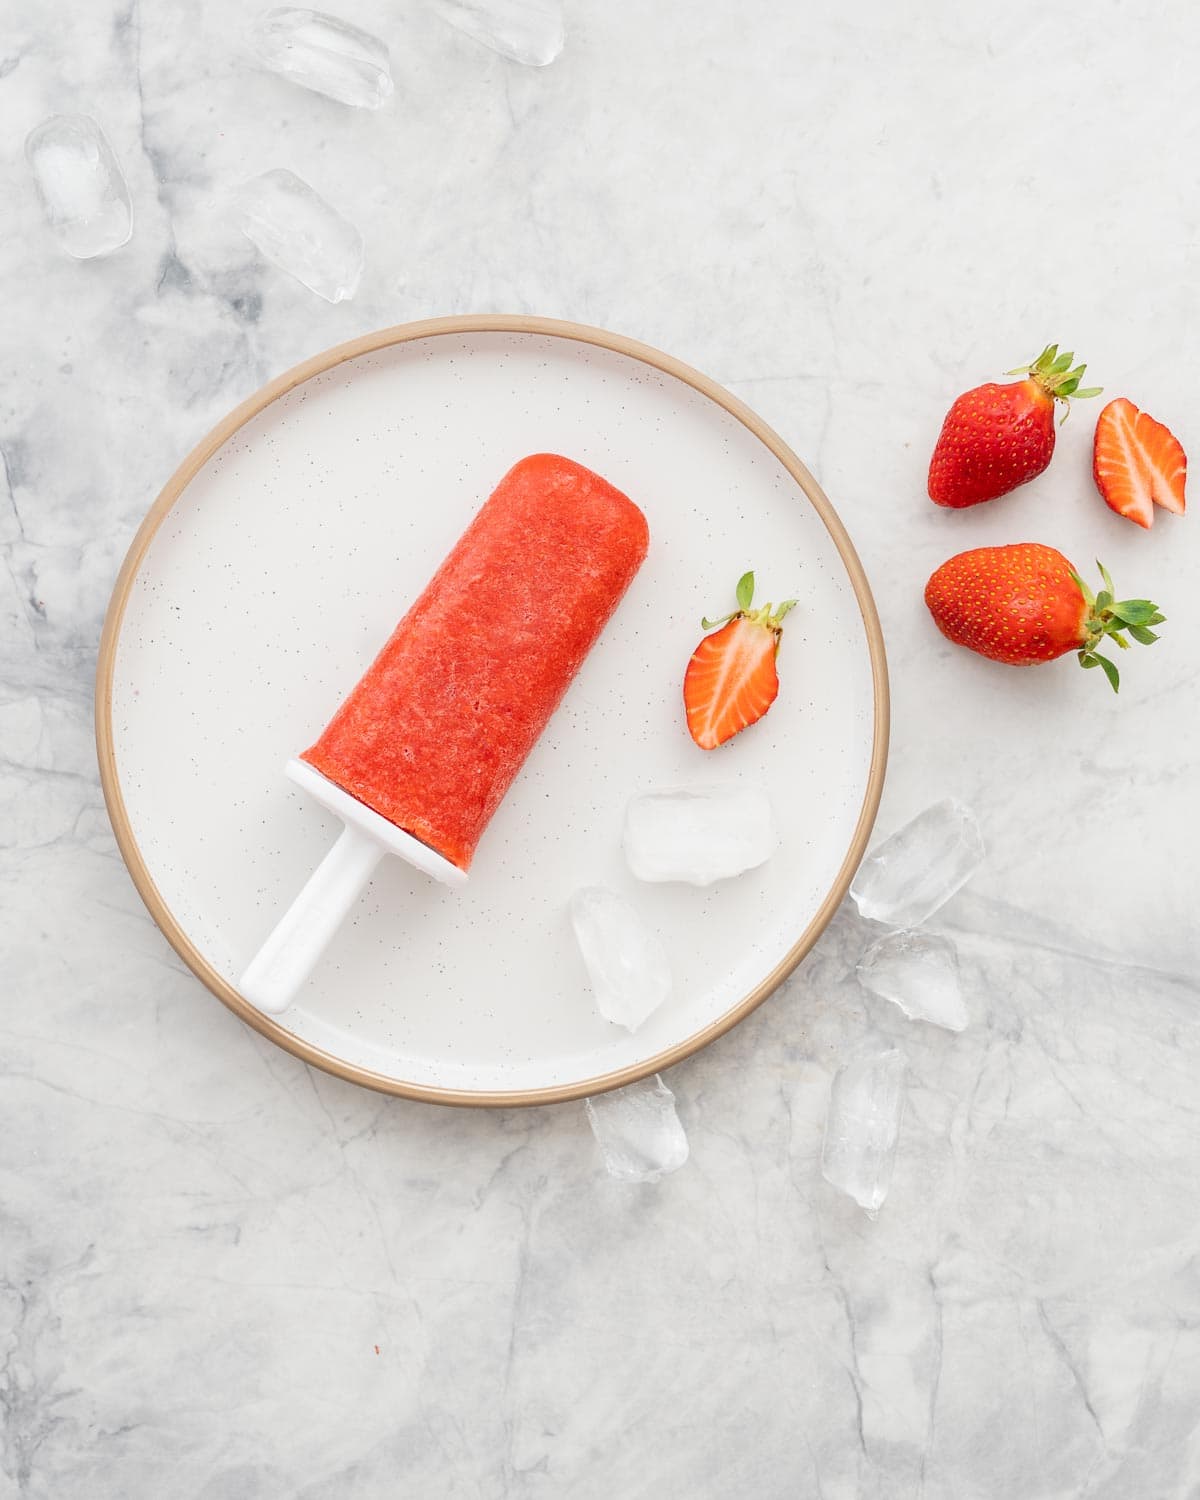 A strawberry popsicle resting on a white plate scattered with ice cubes and pieces of strawberries.